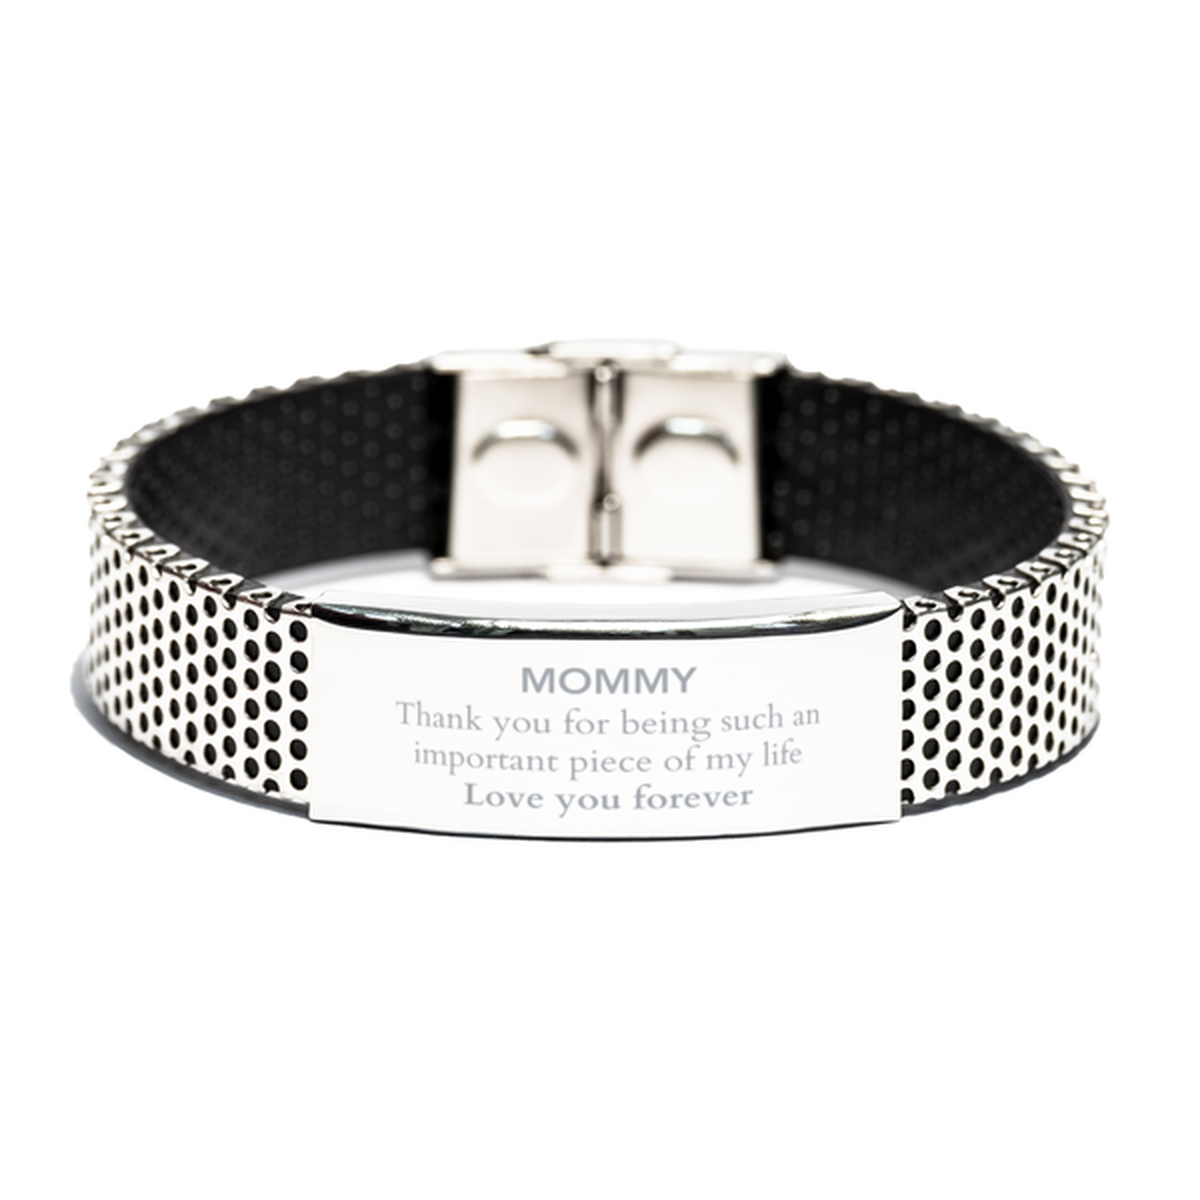 Appropriate Mommy Stainless Steel Bracelet Epic Birthday Gifts for Mommy Thank you for being such an important piece of my life Mommy Christmas Mothers Fathers Day